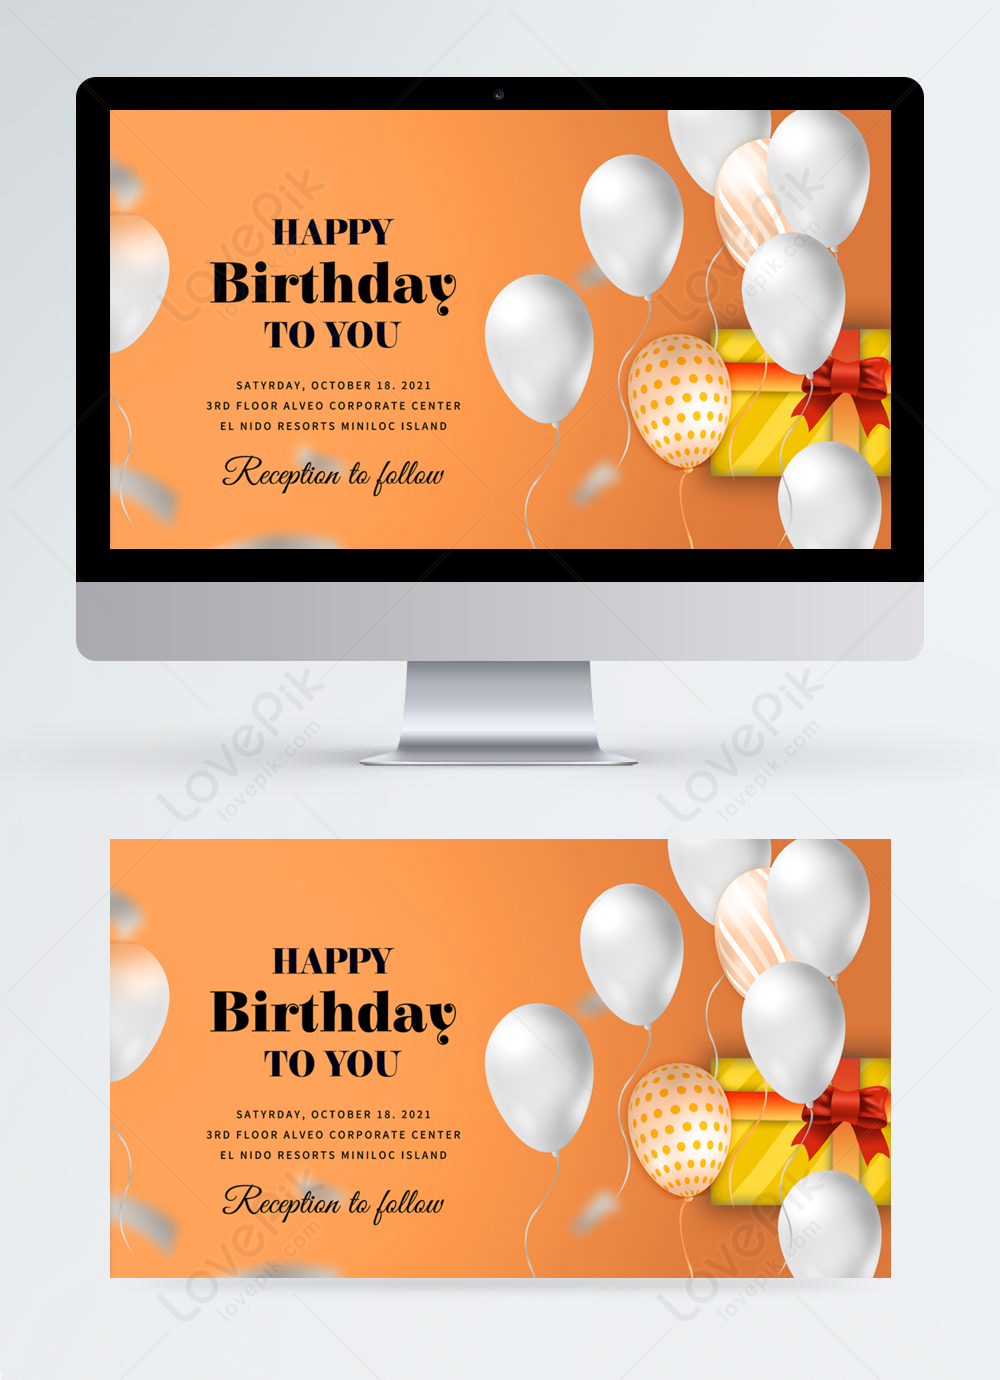 stylish-modern-gradient-background-exquisite-birthday-party-banner-template-image-picture-free